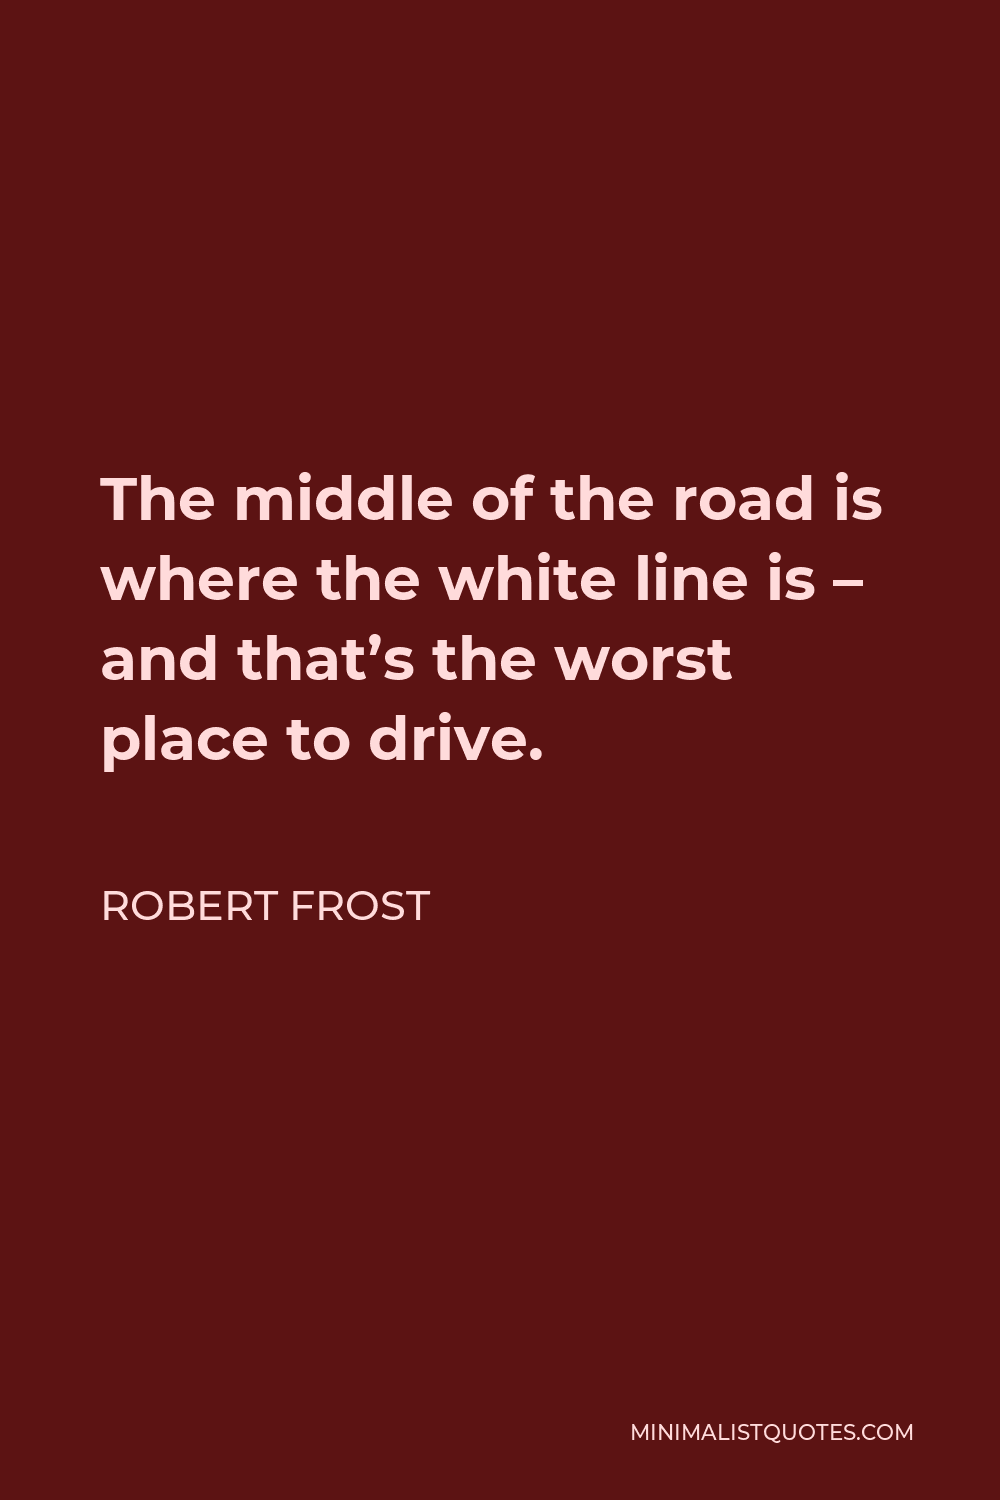 Robert Frost Quote - The middle of the road is where the white line is – and that’s the worst place to drive.